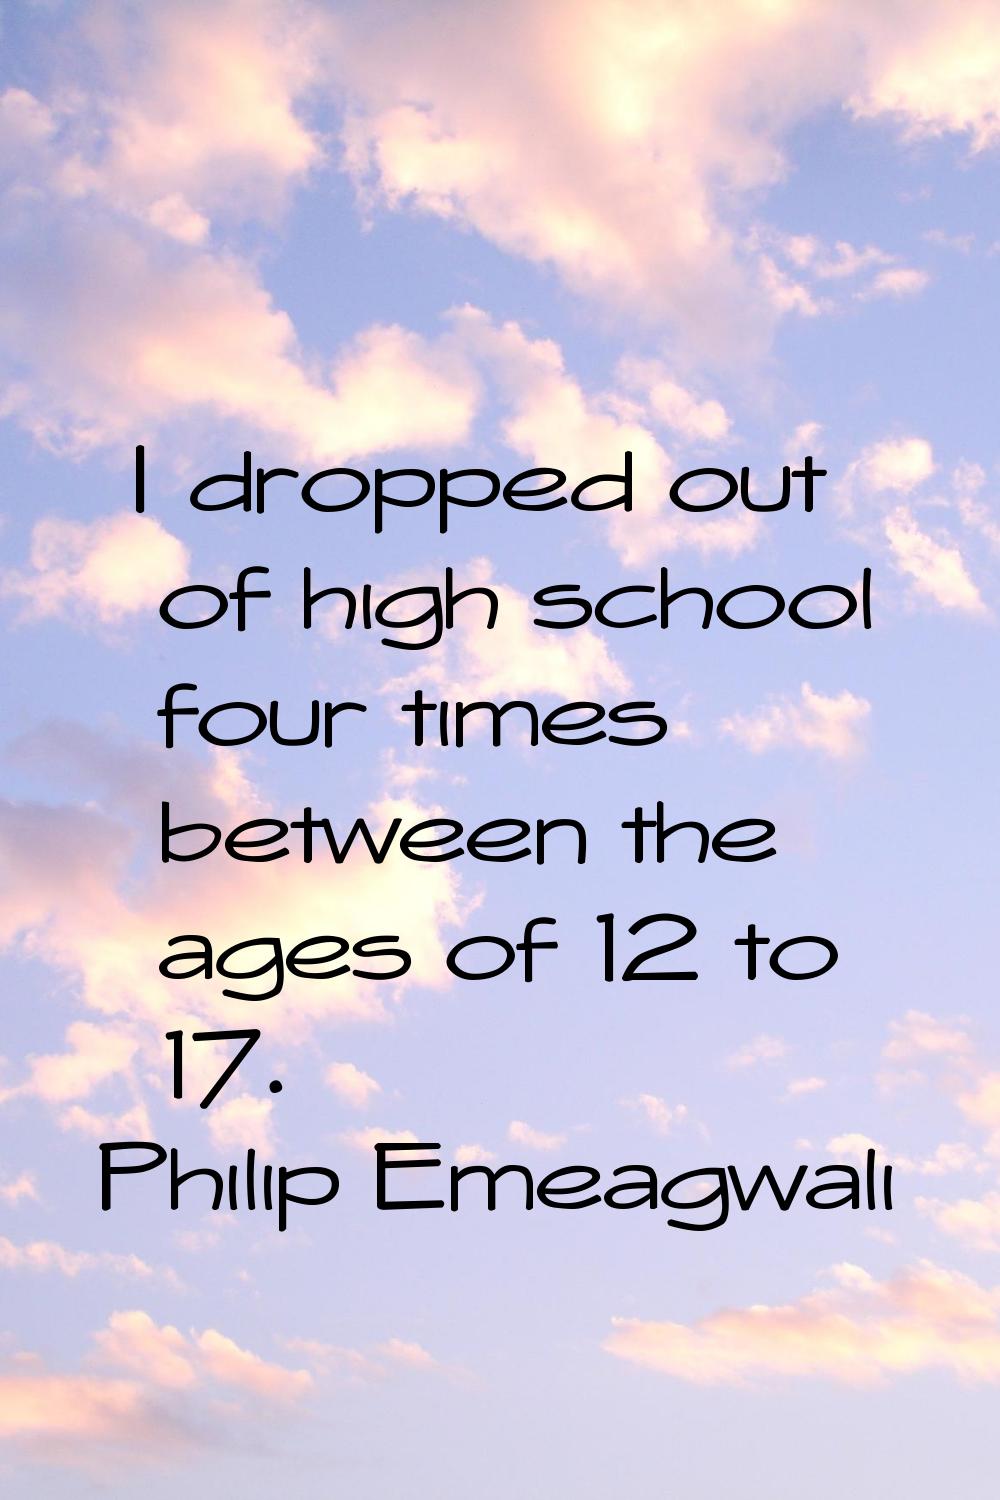 I dropped out of high school four times between the ages of 12 to 17.